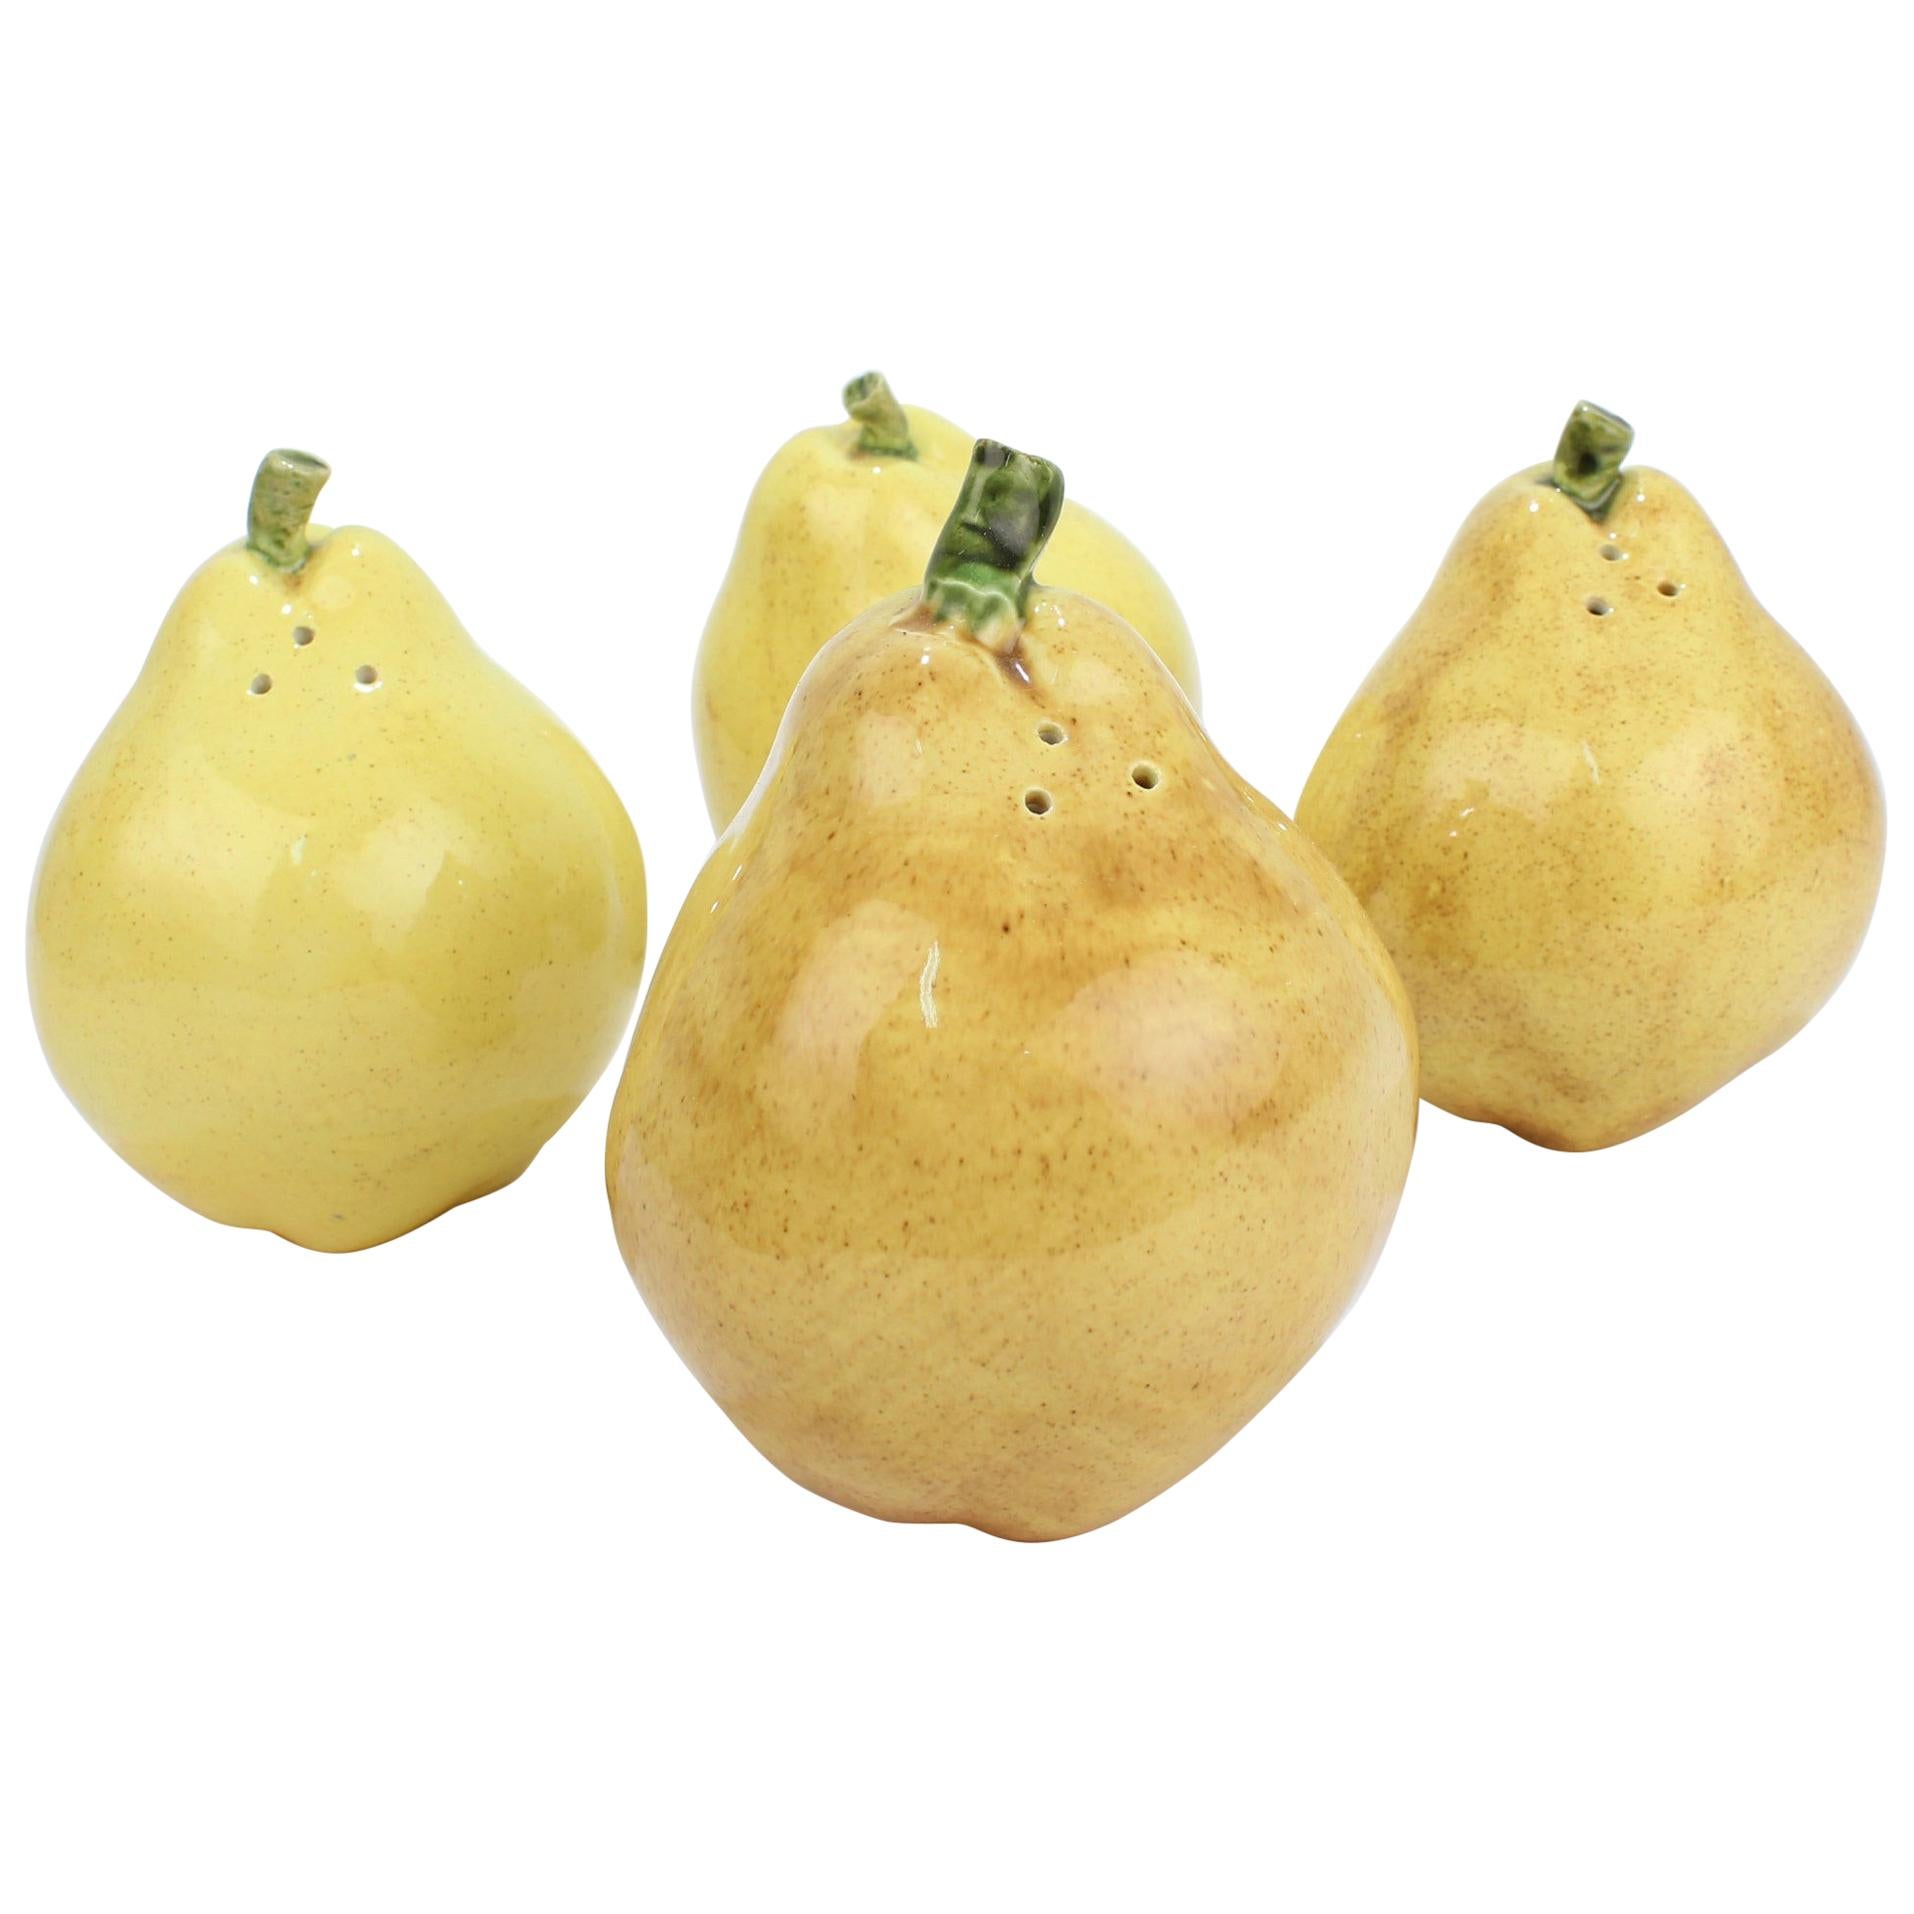 2 Pairs of Pear Shaped Yellow Pottery Salt and Pepper Shakers For Sale